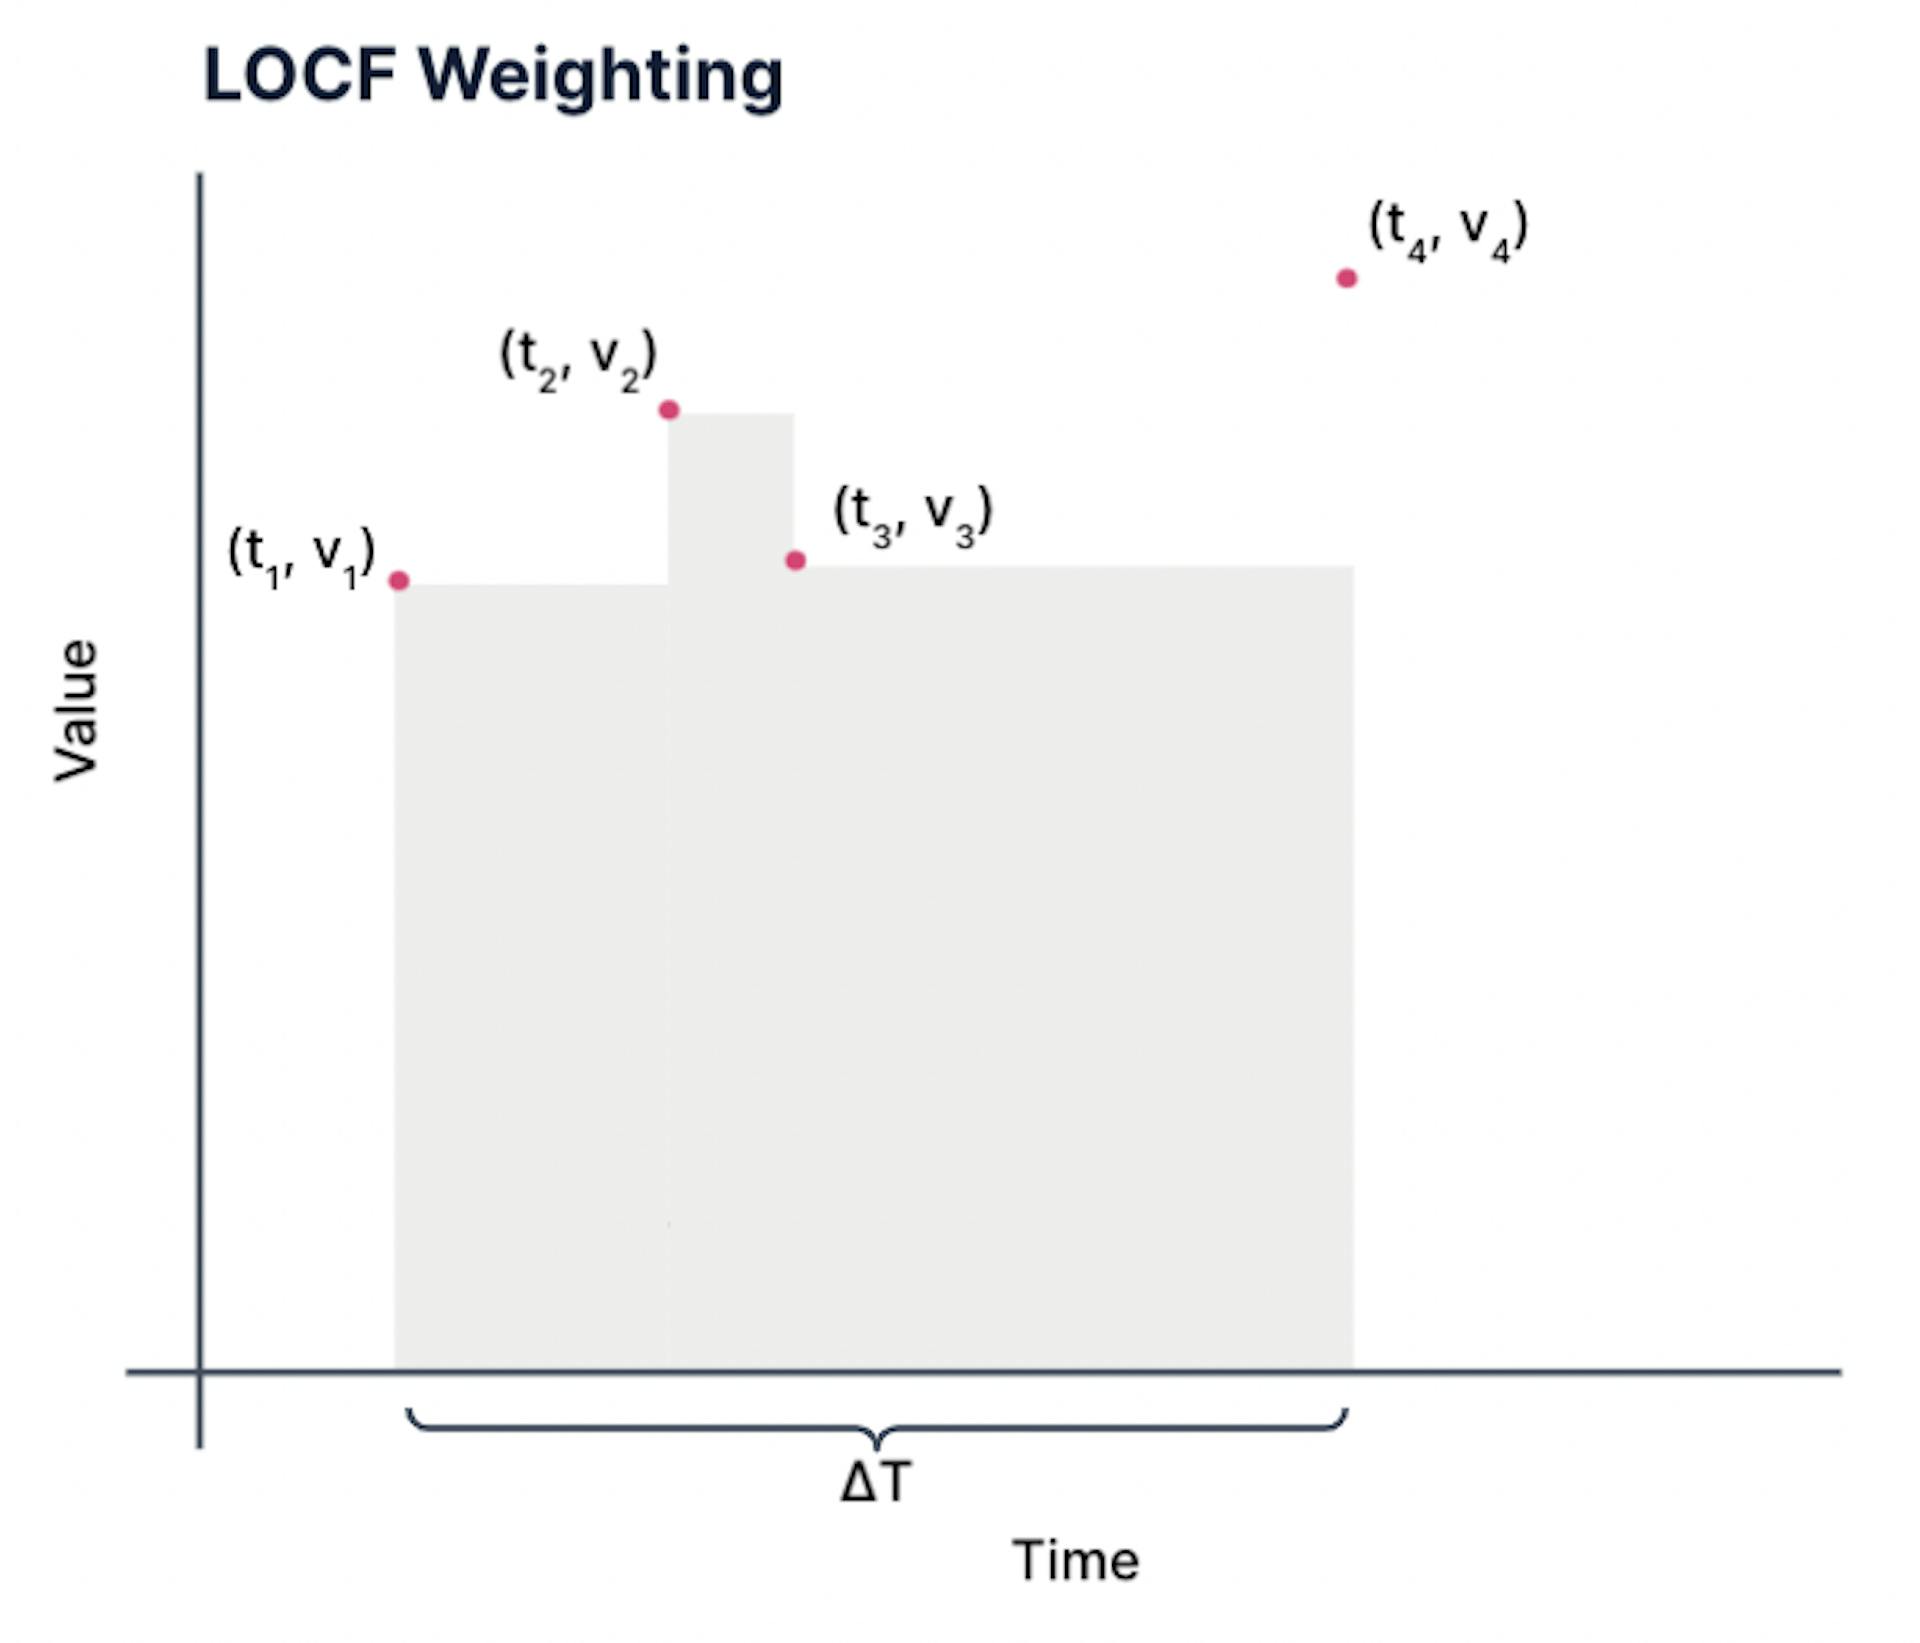 LOCF weighting is useful when you know the value is constant until the following point.